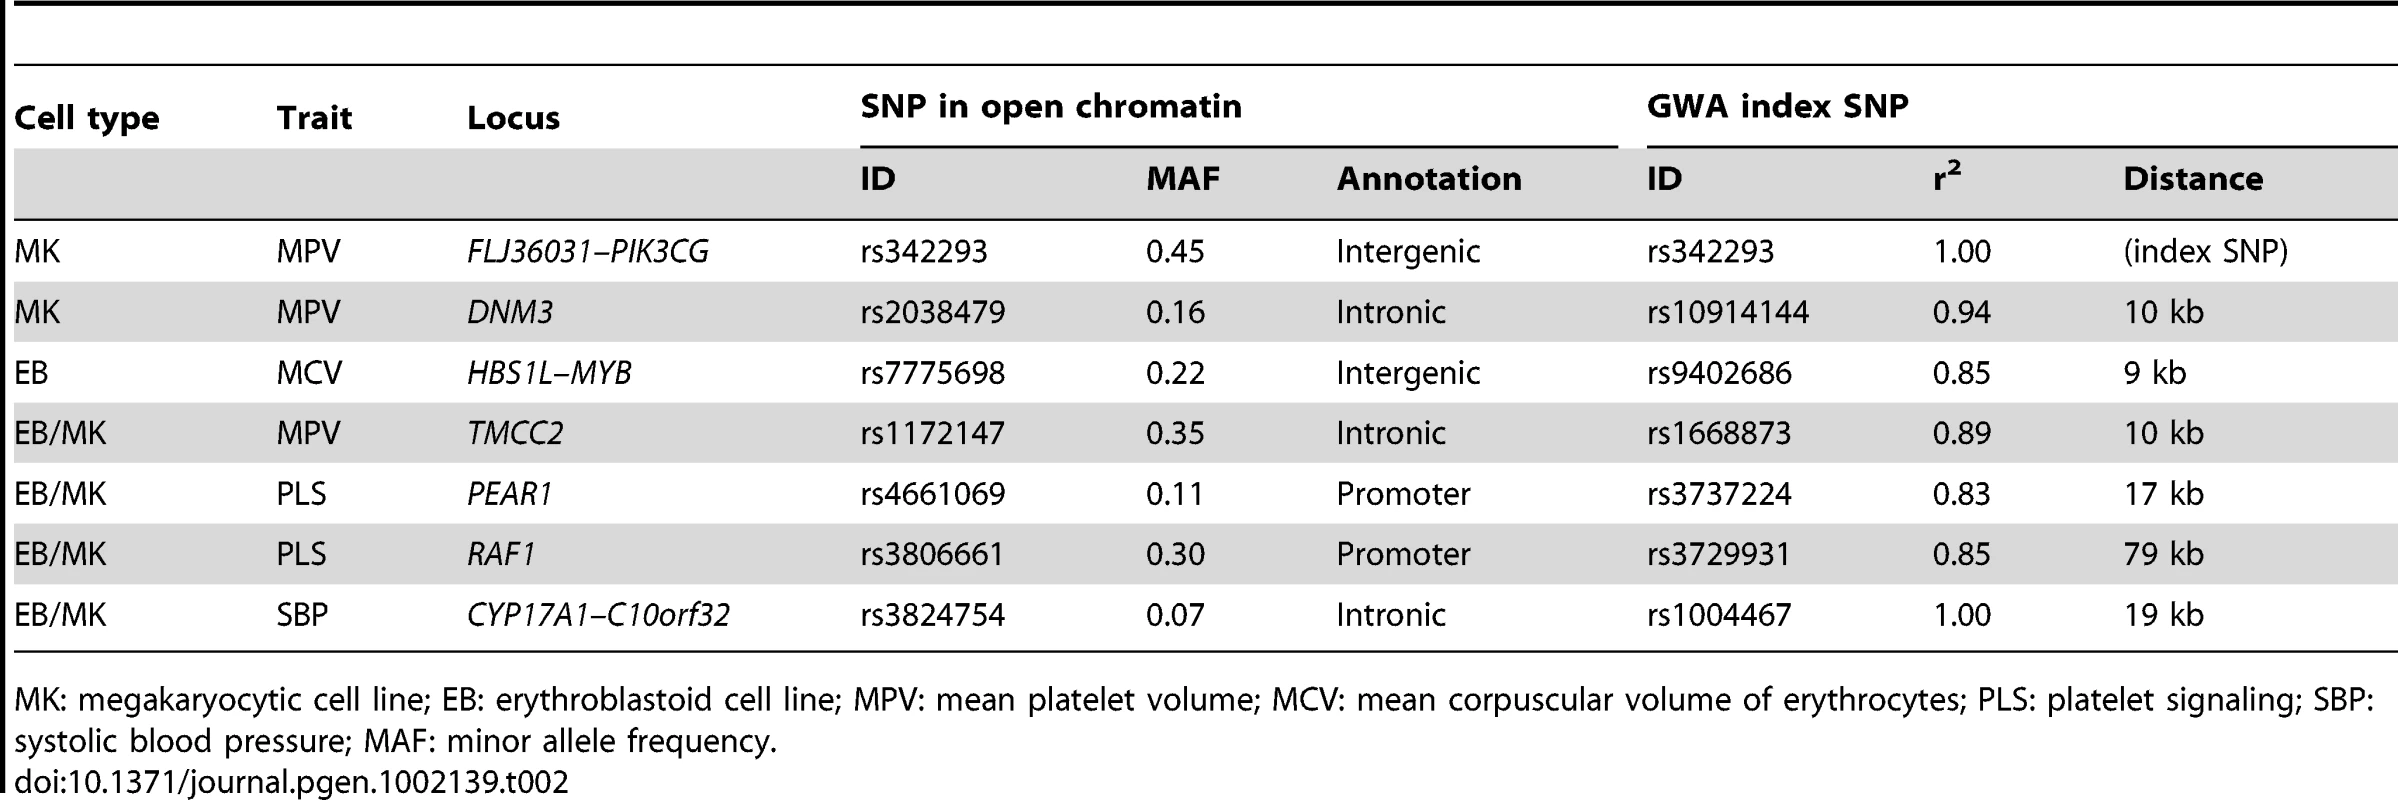 Seven sequence variants associated with cardiovascular-related and hematological intermediate traits are located in nucleosome-depleted regions (NDRs).